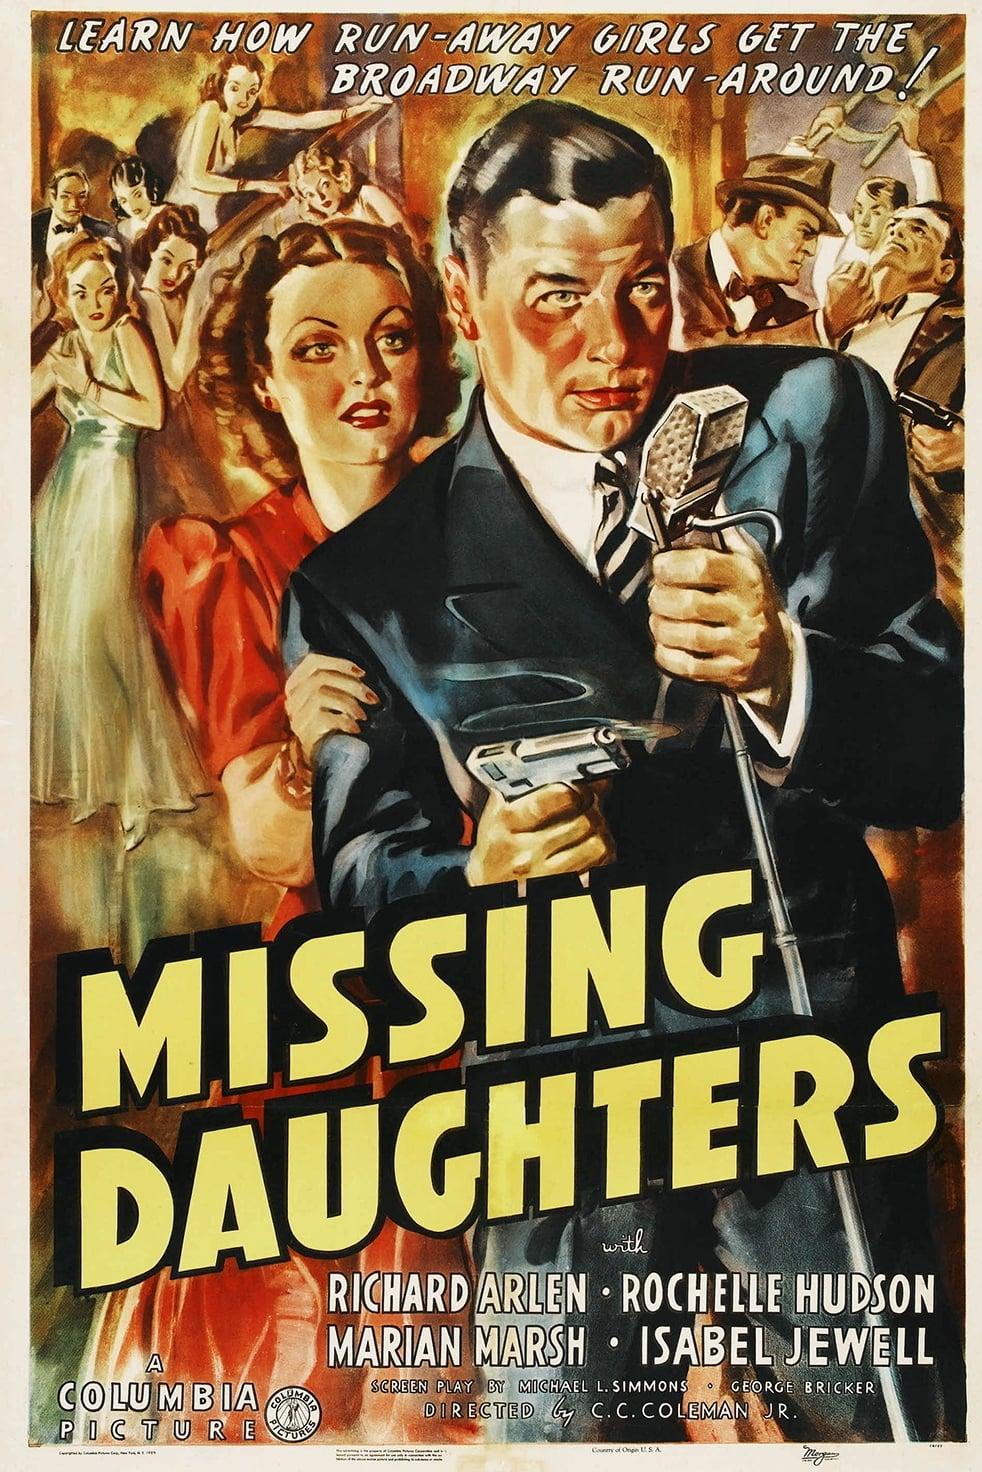 Missing Daughters poster